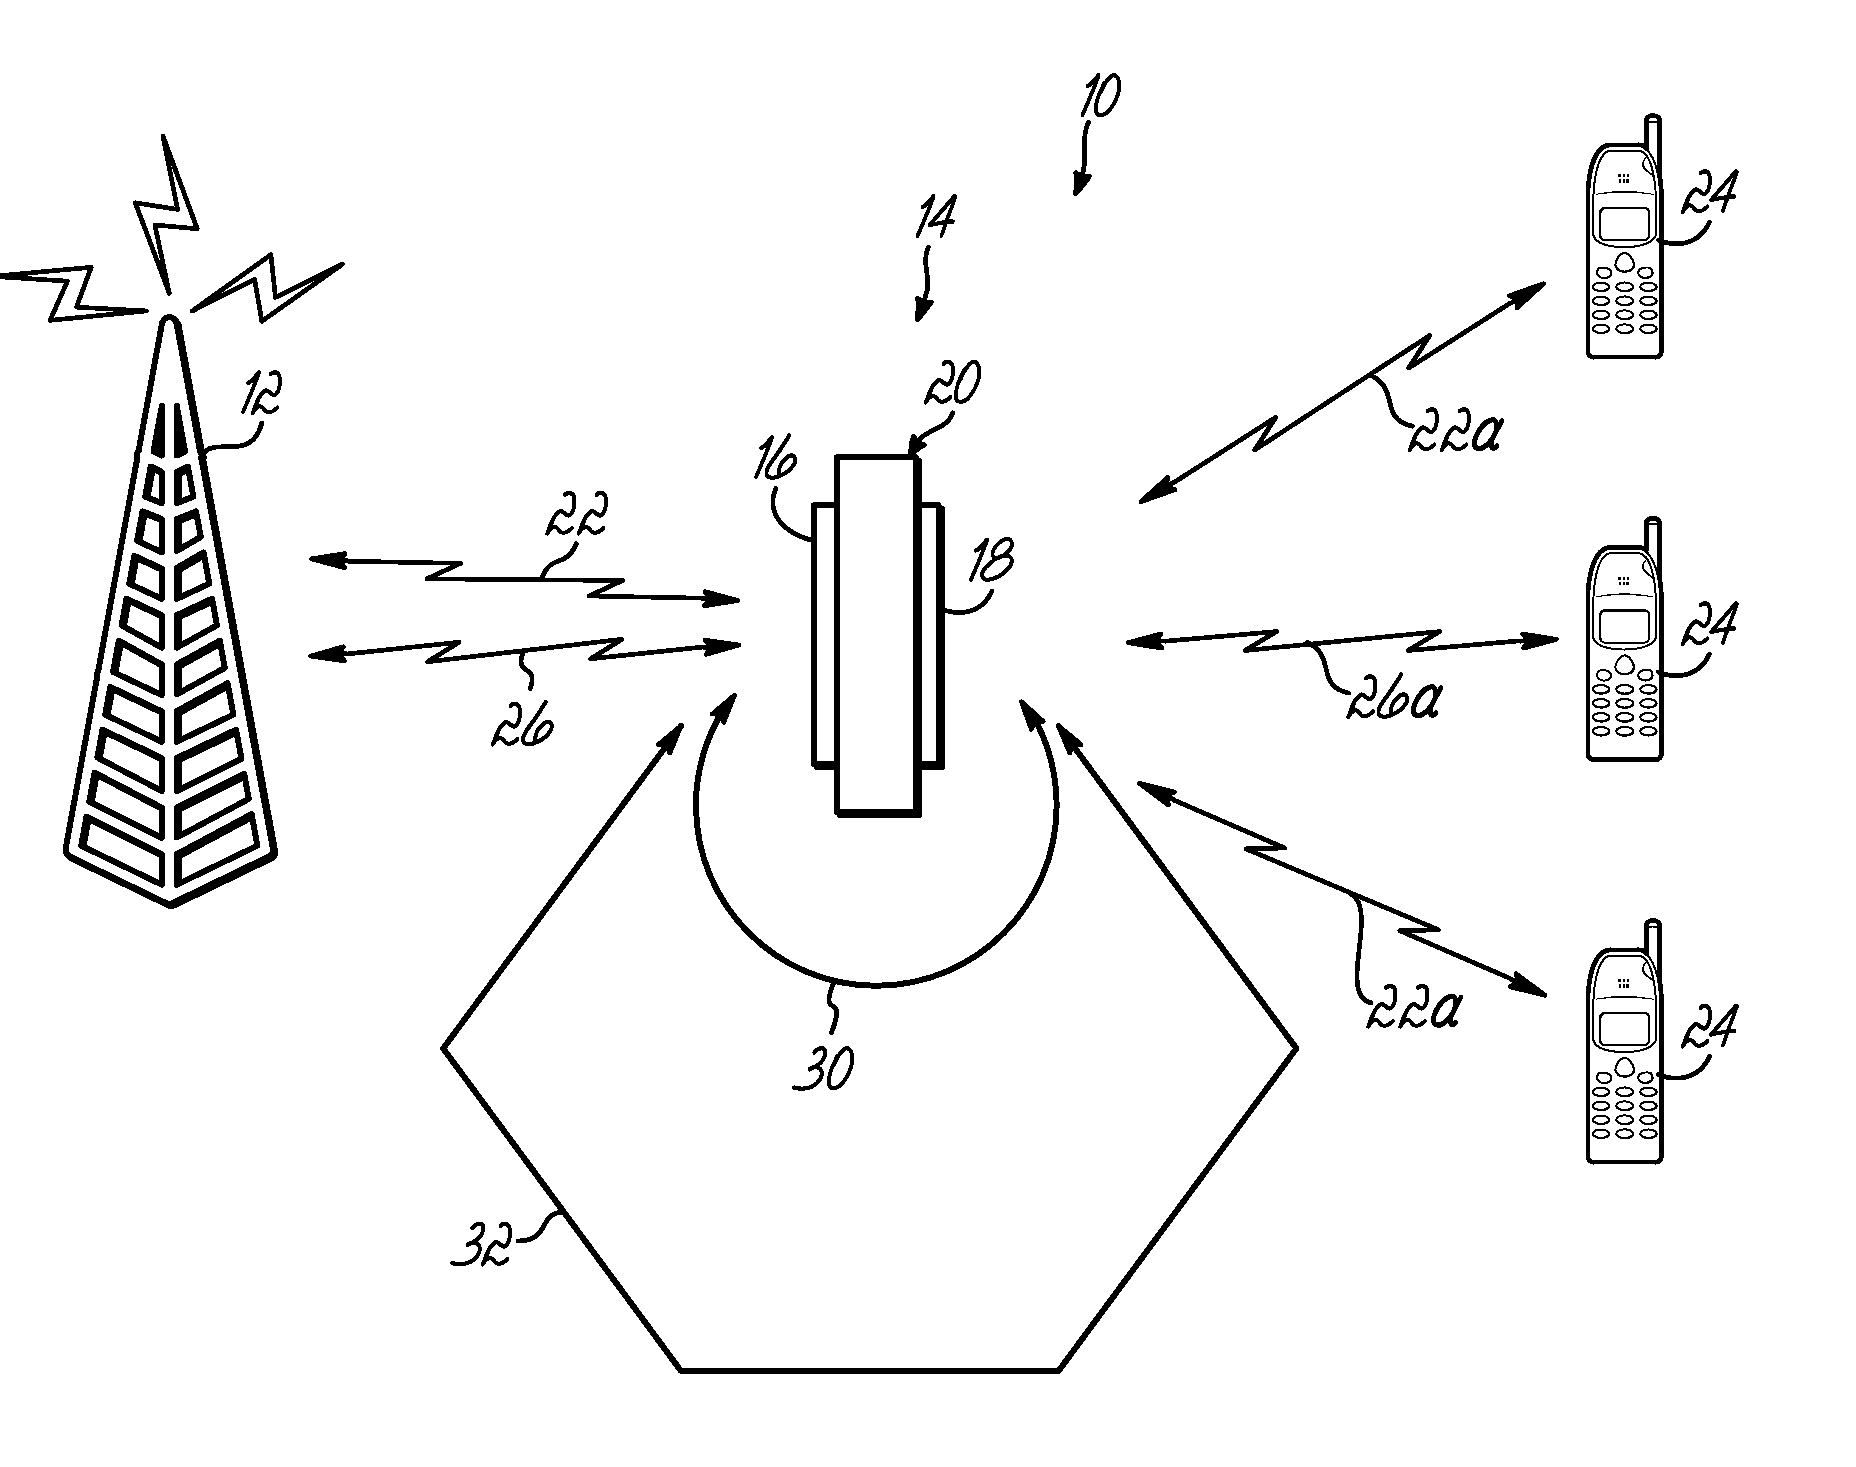 System and method for feedback cancellation in repeaters